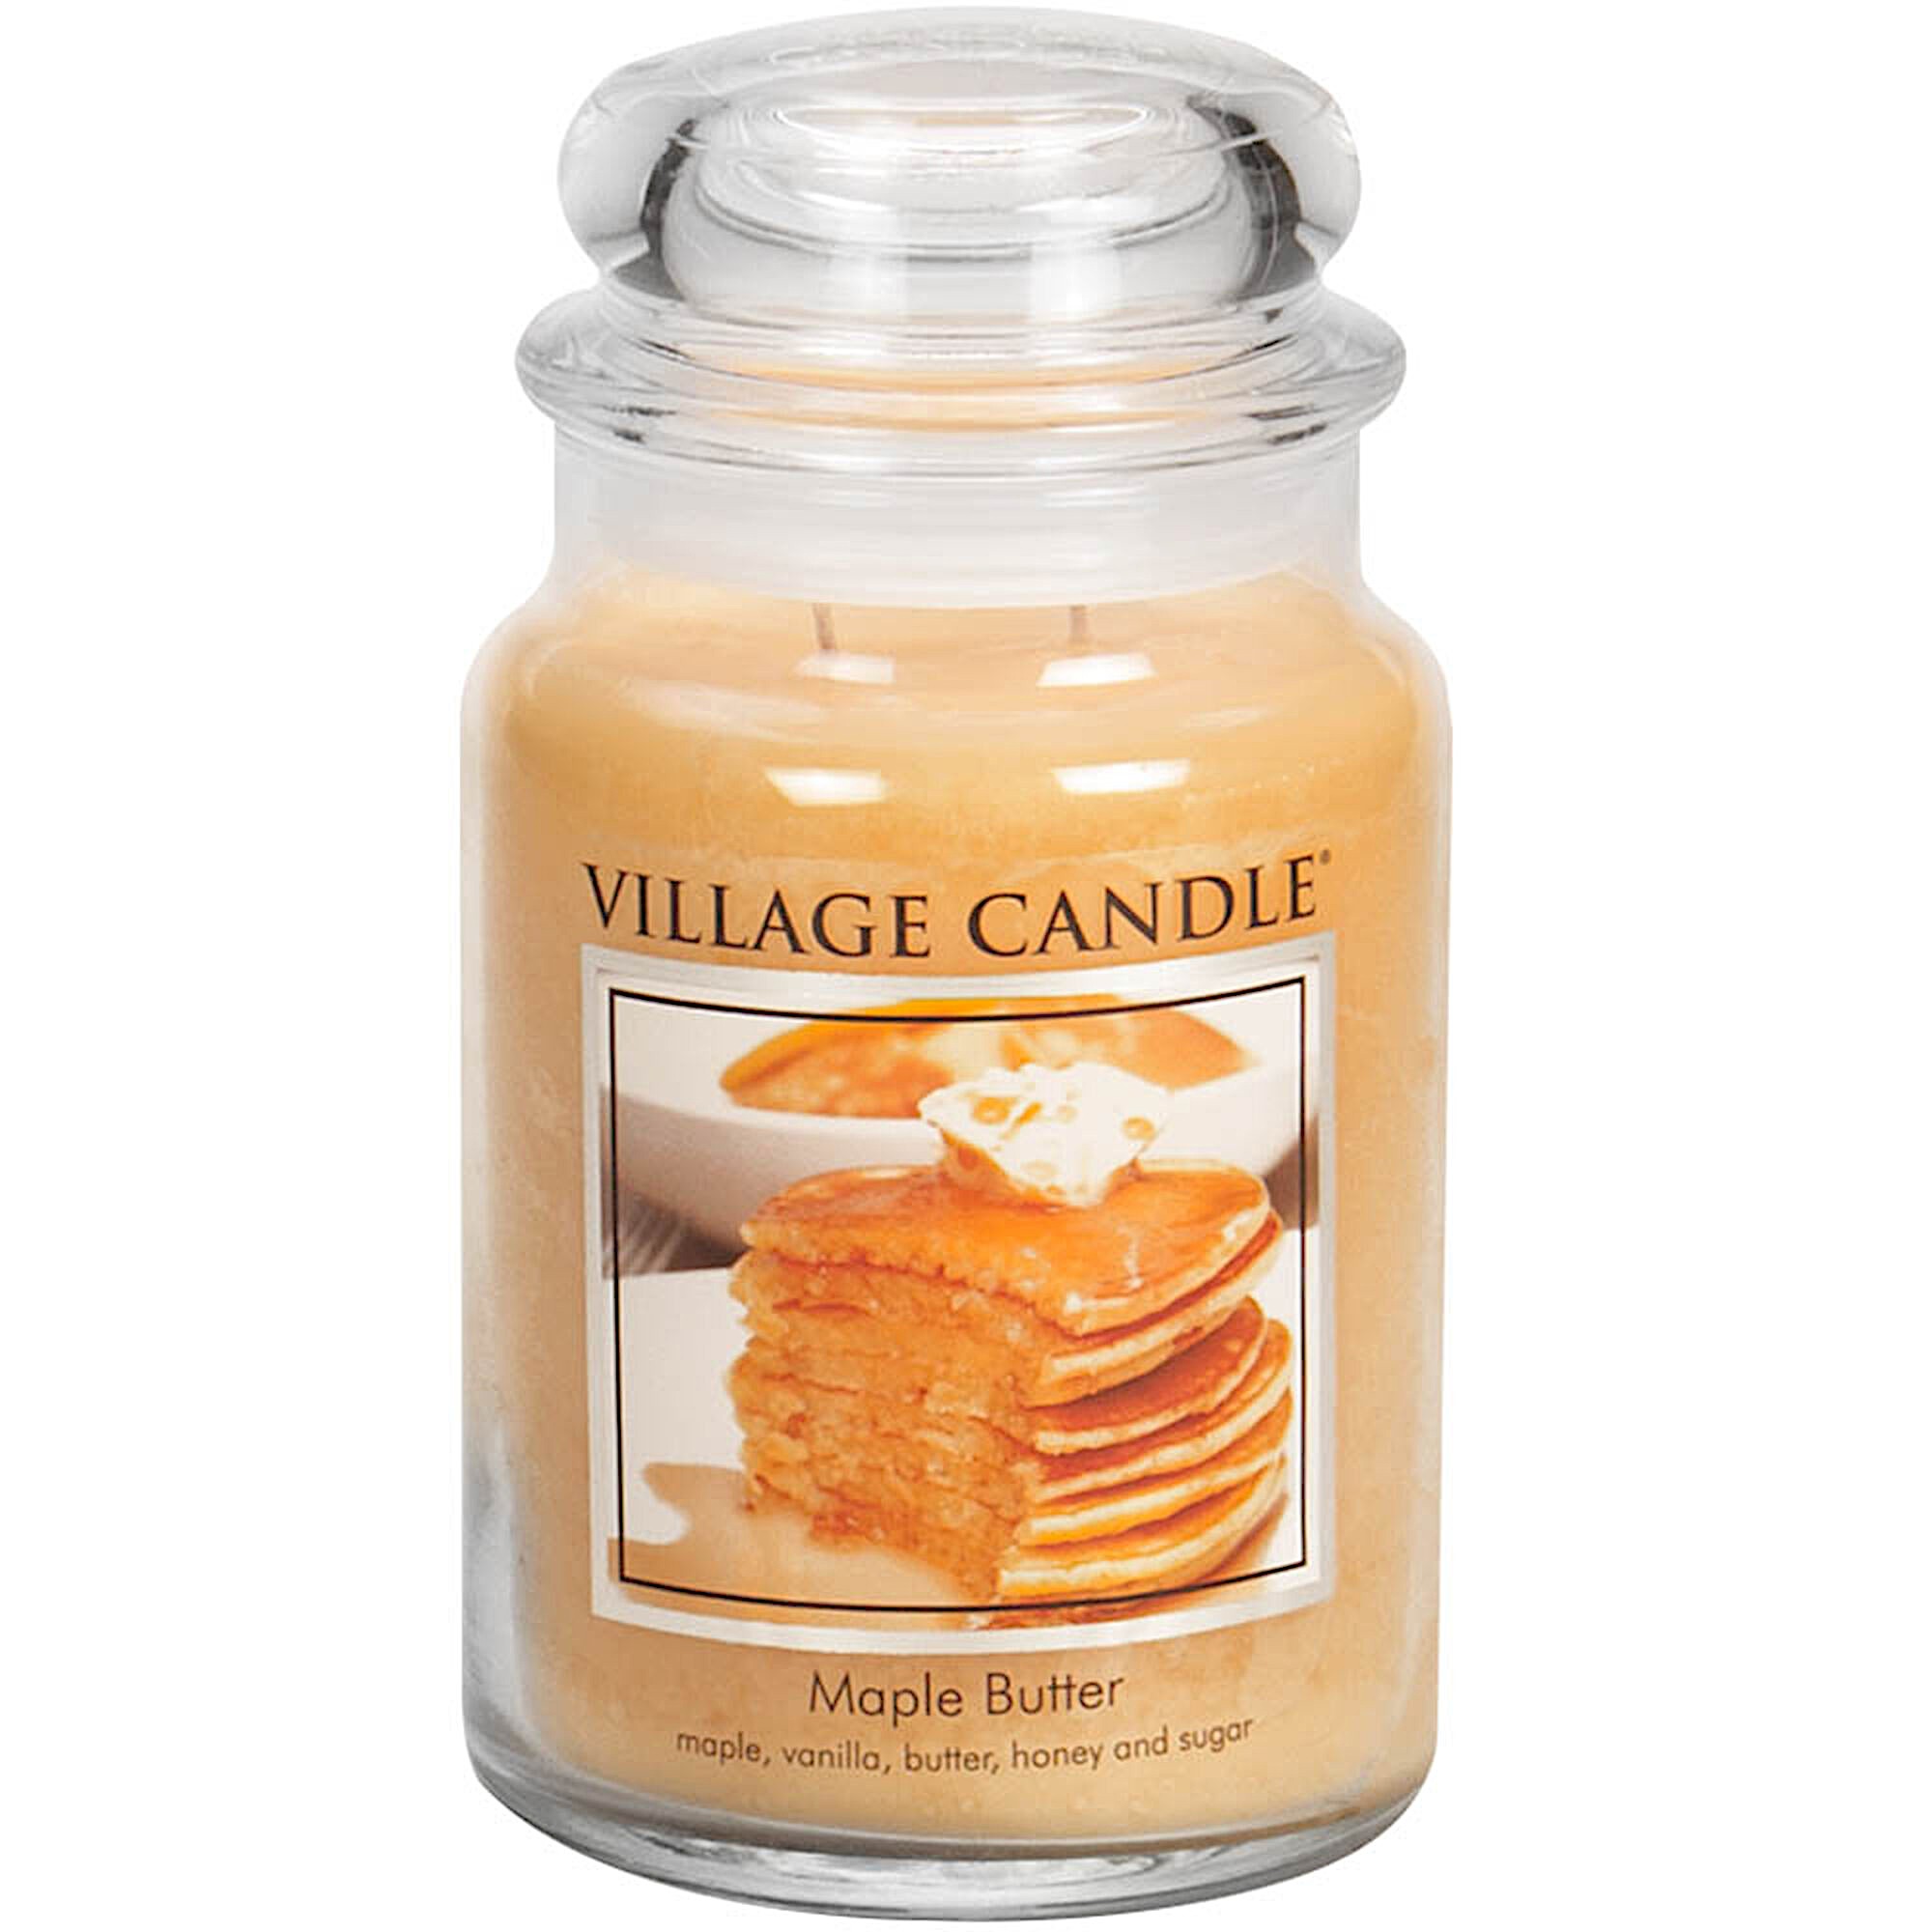 Village Candle Maple Butter Large Jar Glass